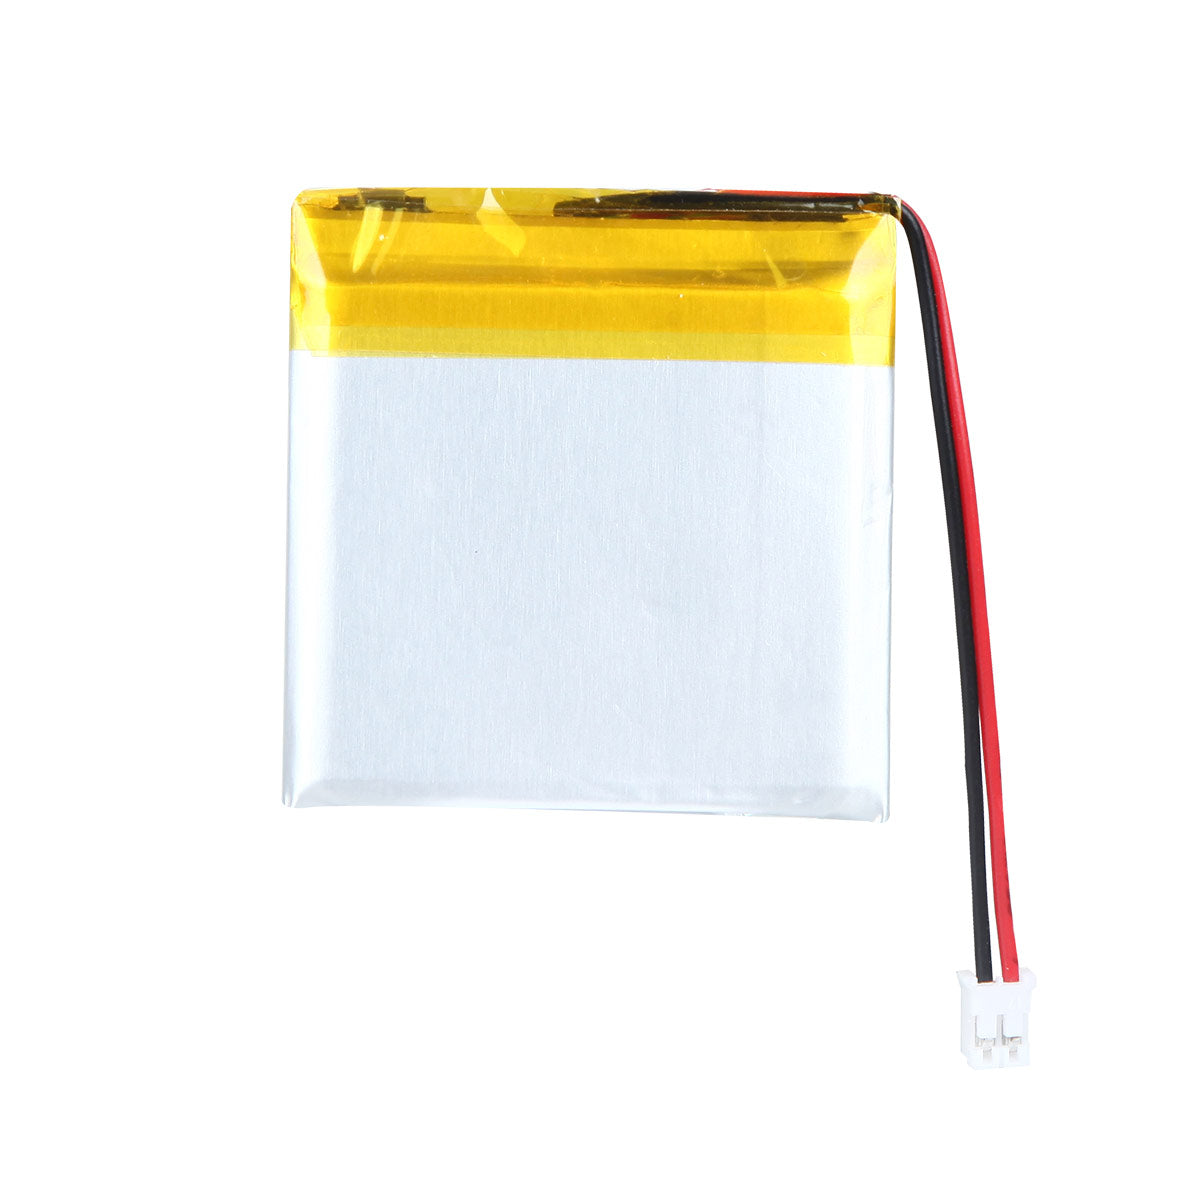 YDL 3.7V 1000mAh 554141 Rechargeable Lithium Polymer Battery Length 43mm